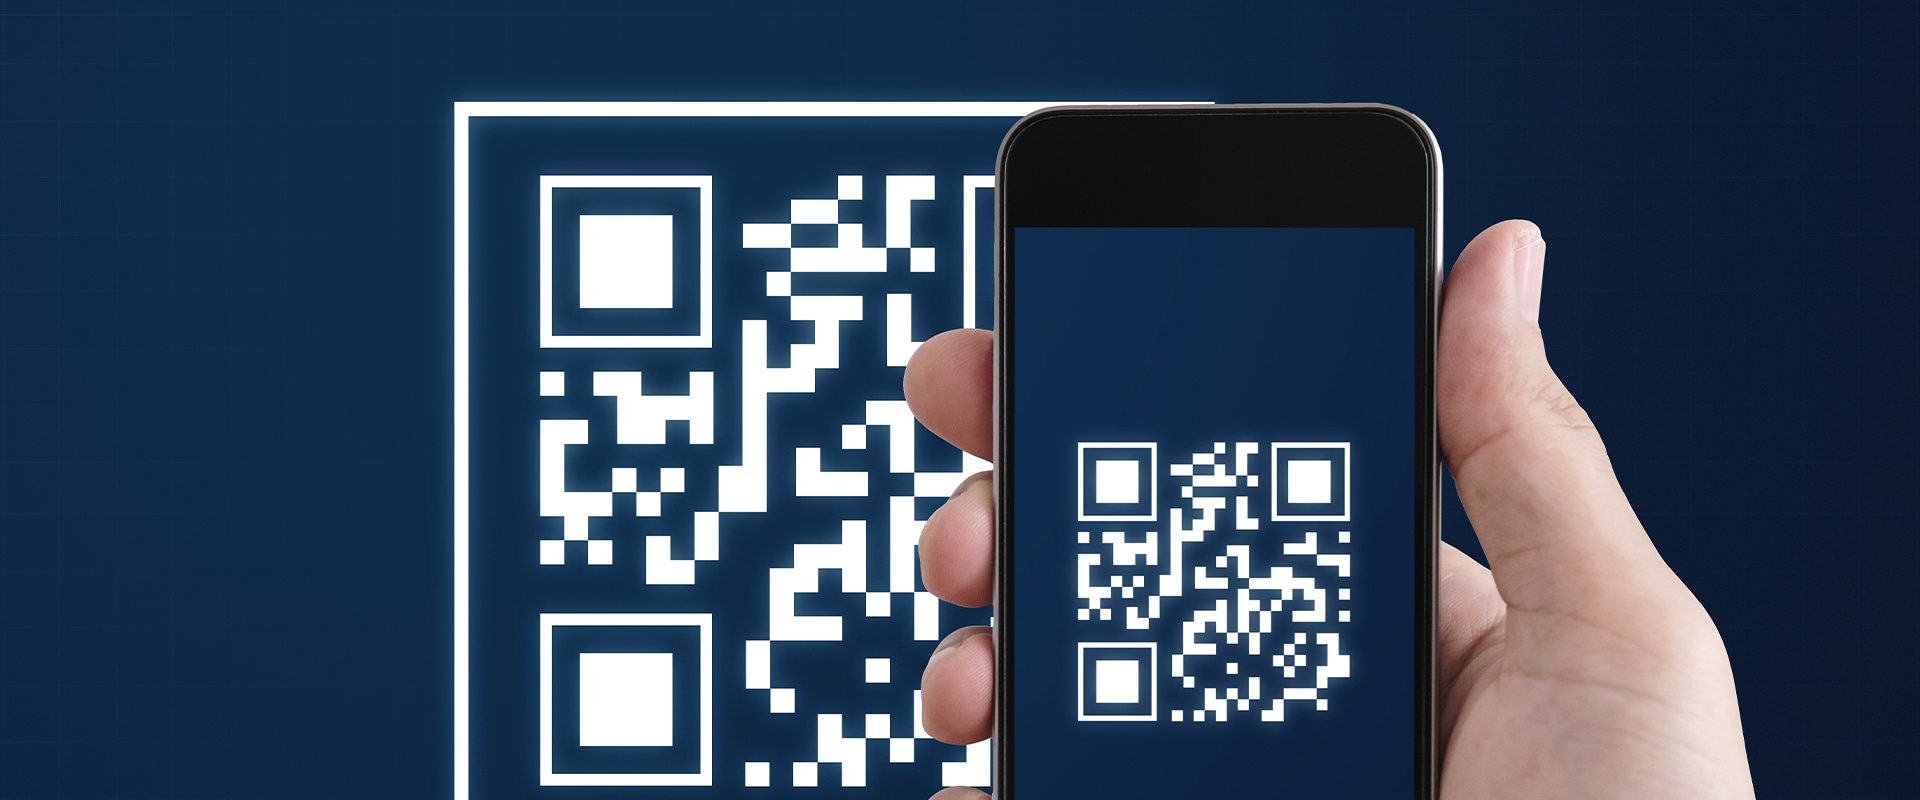 Mobile Device Compatibility for Scanning QR Codes